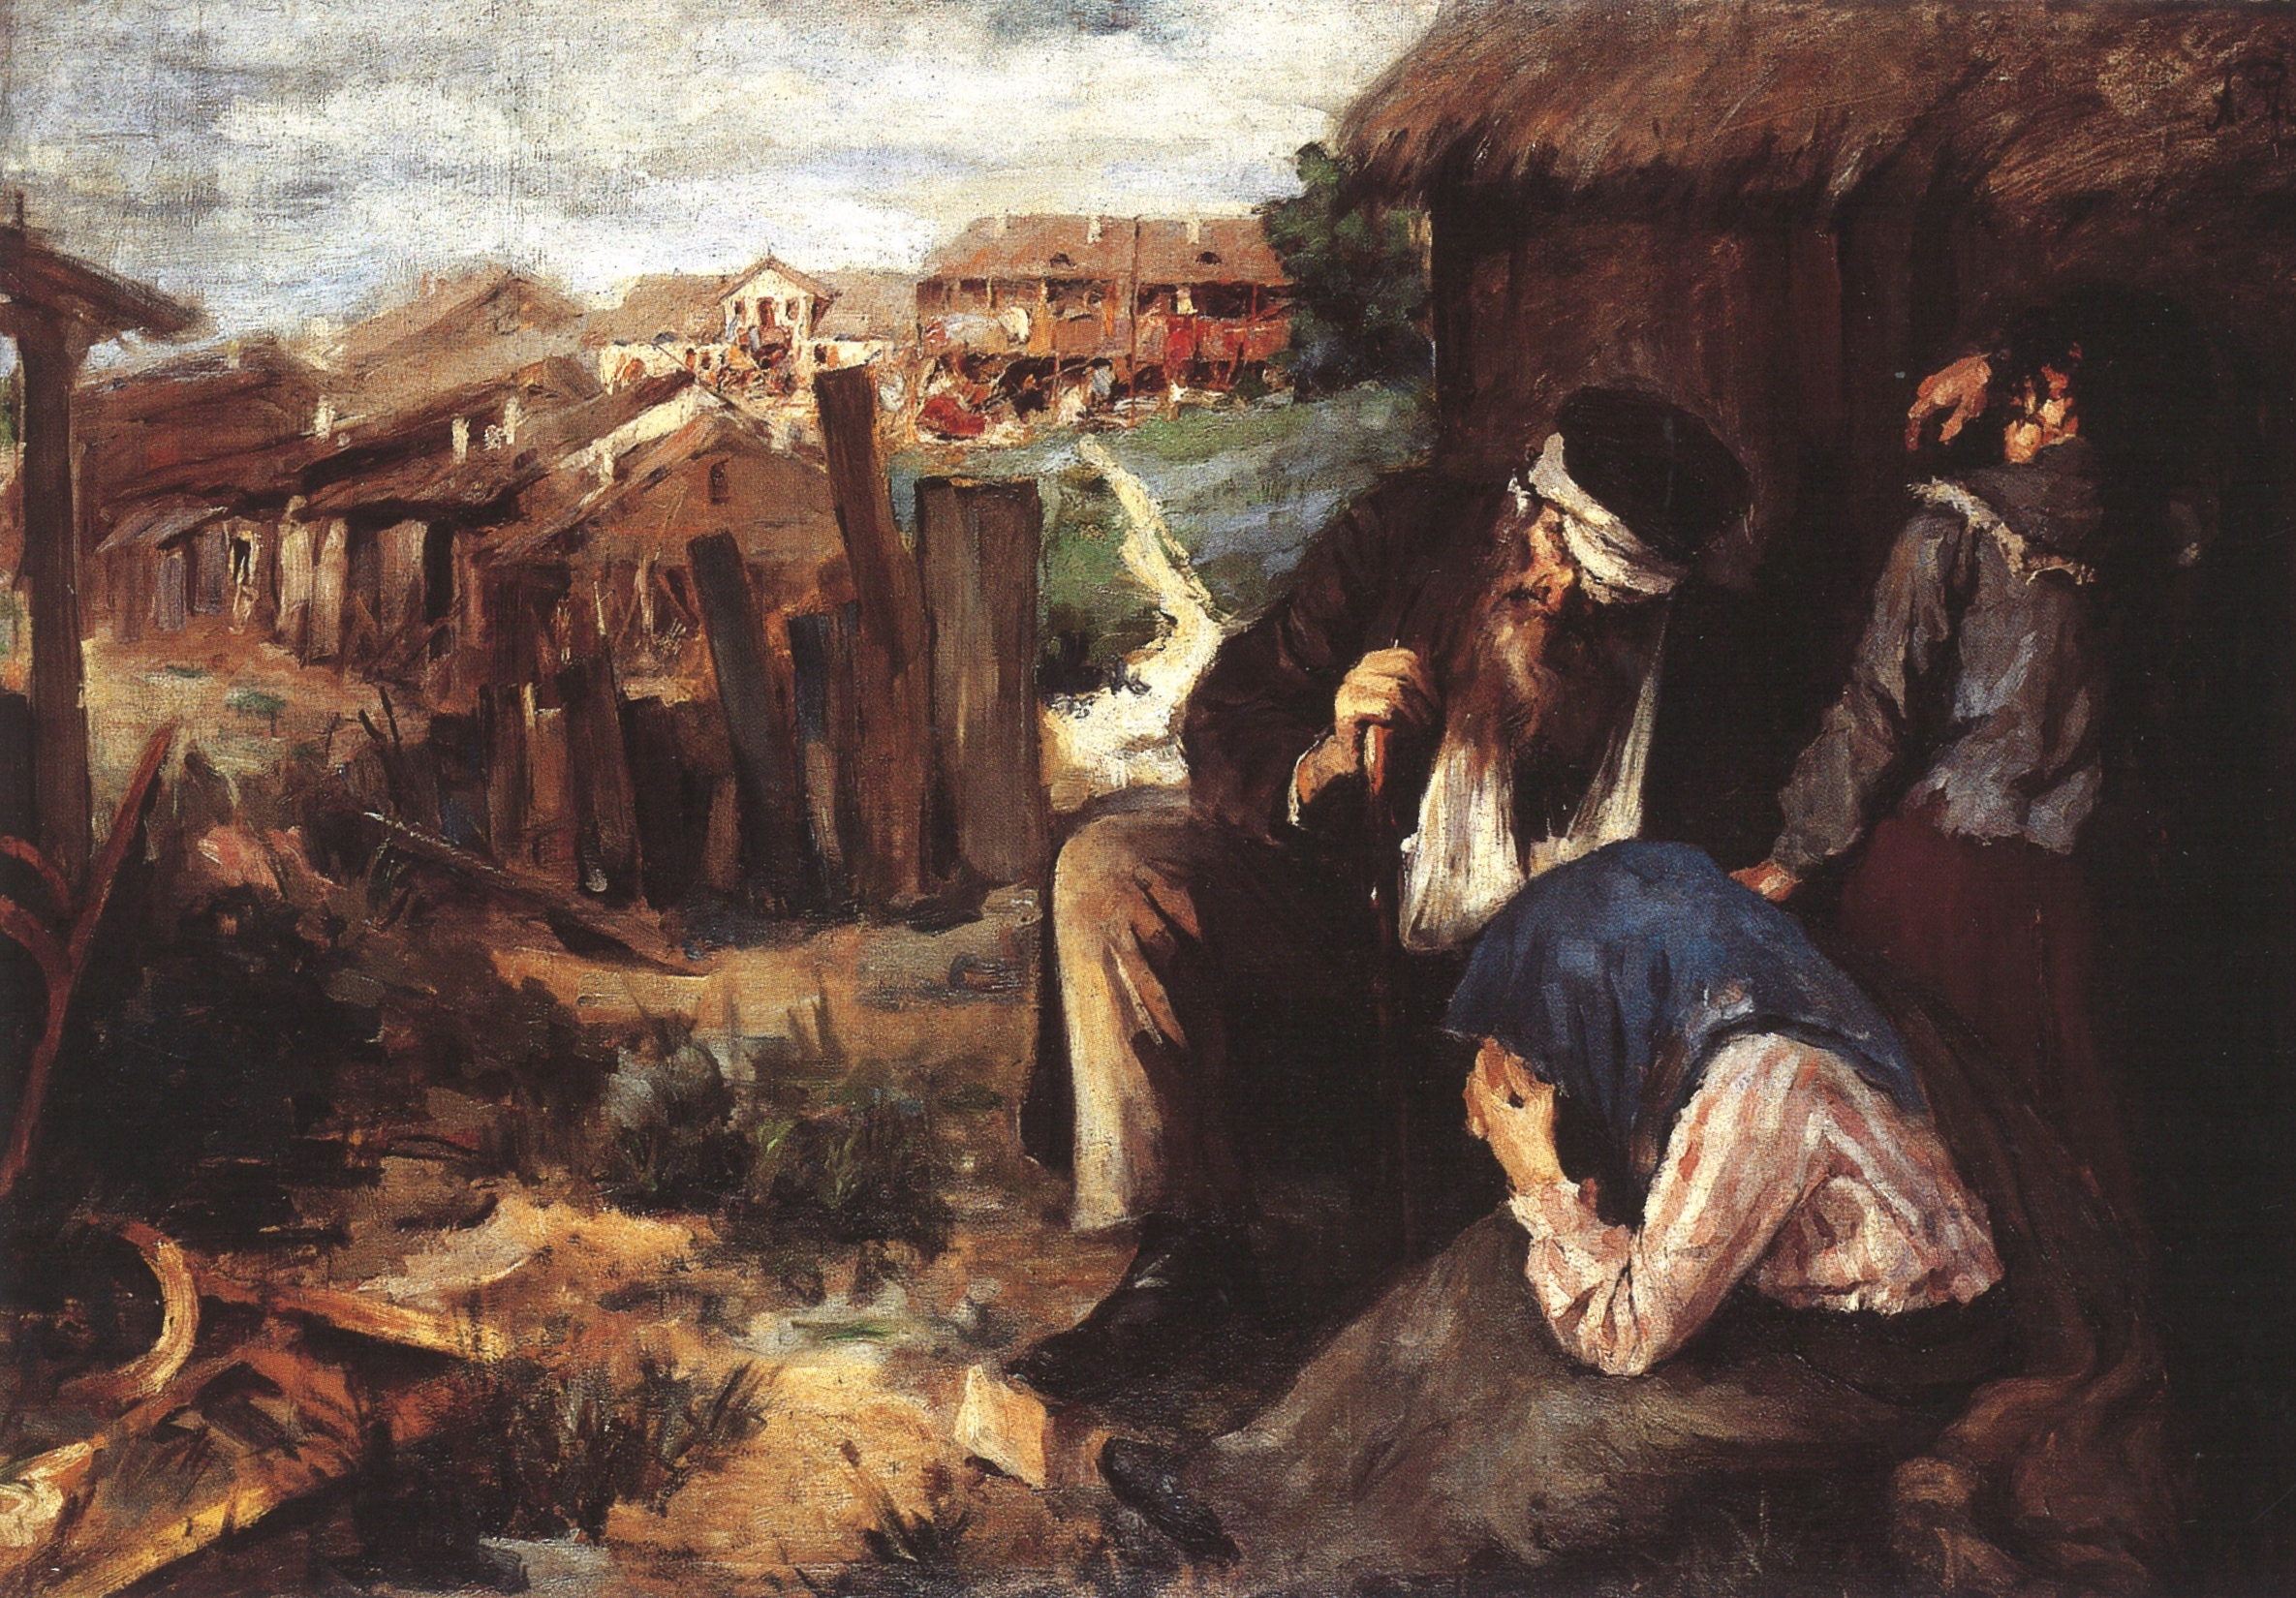 Abel Pann’s The Day after the Pogrom: A Courtyard with Ruins and a Bereaved Family, 1903.